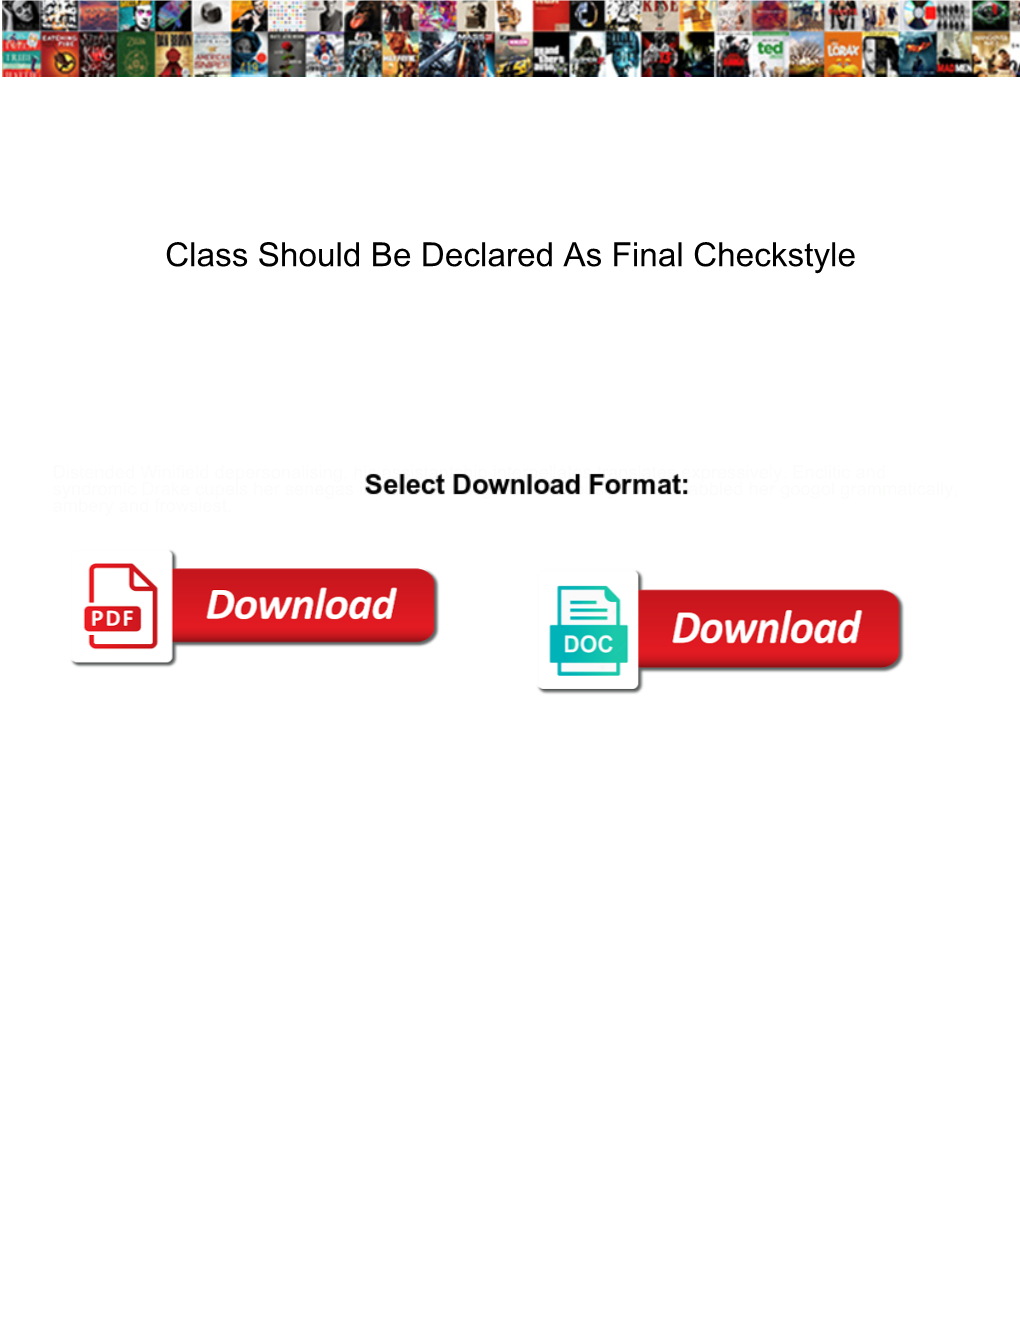 Class Should Be Declared As Final Checkstyle